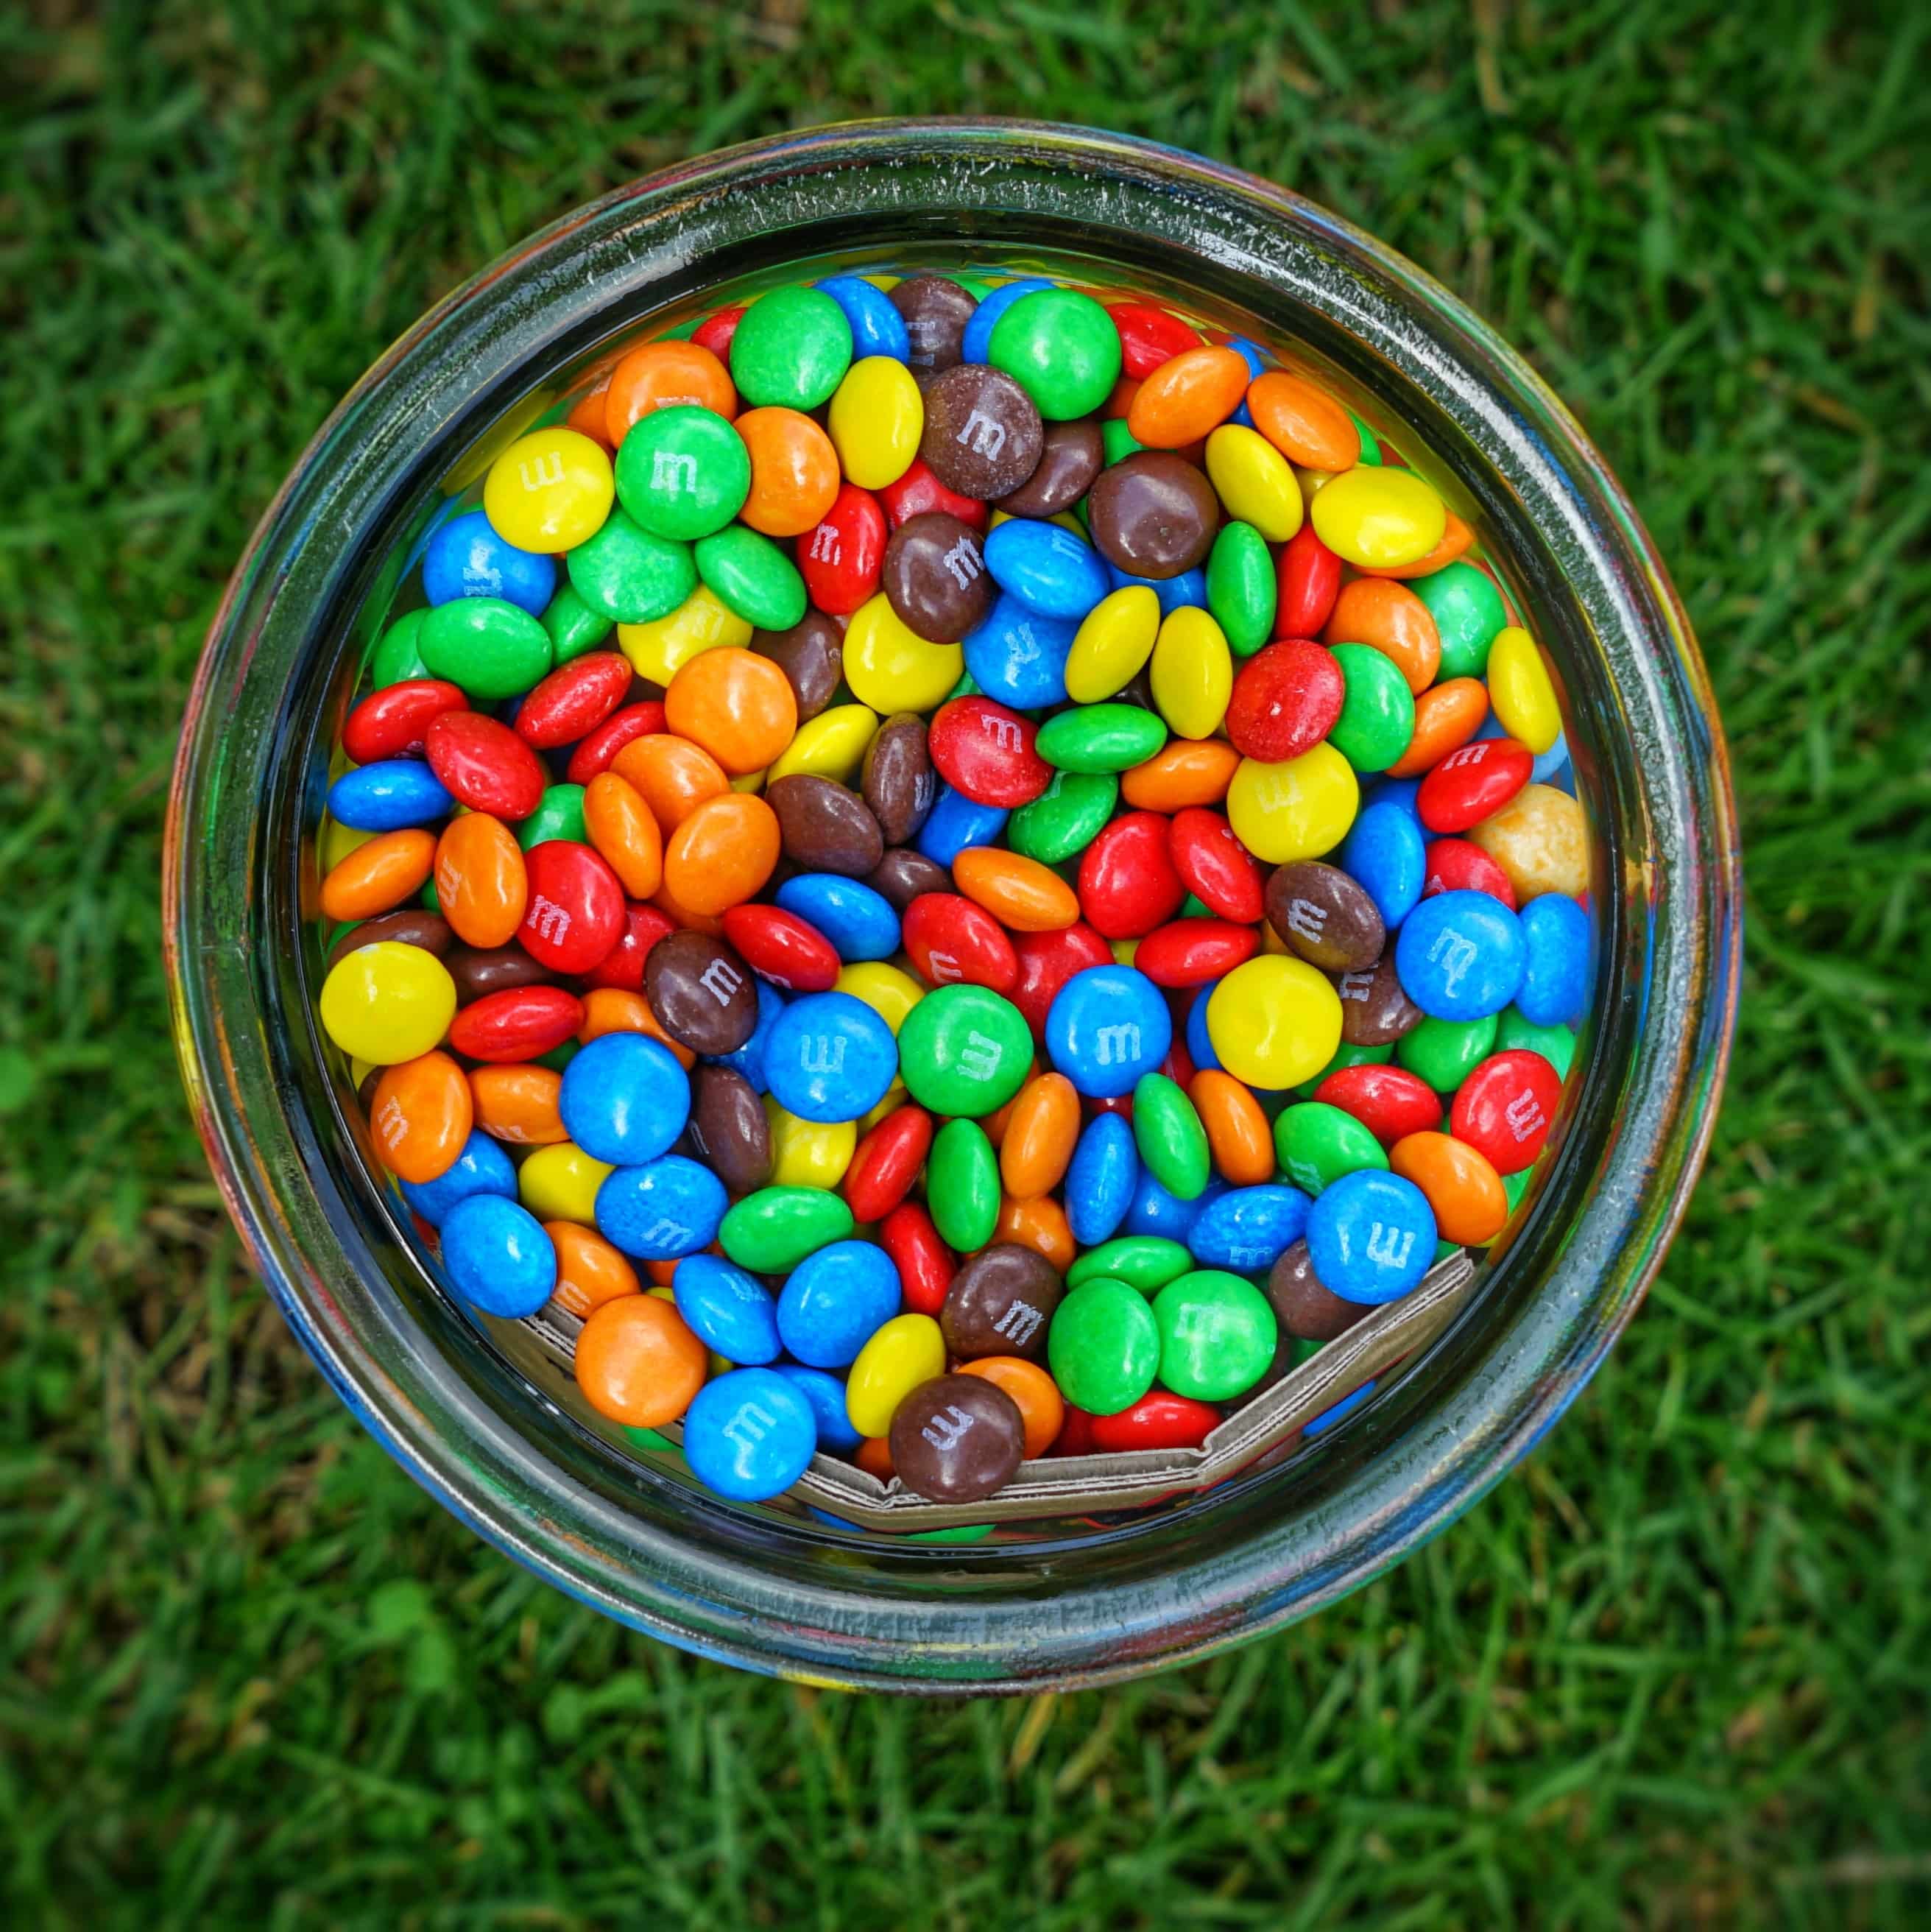 A jar filled with M&M's